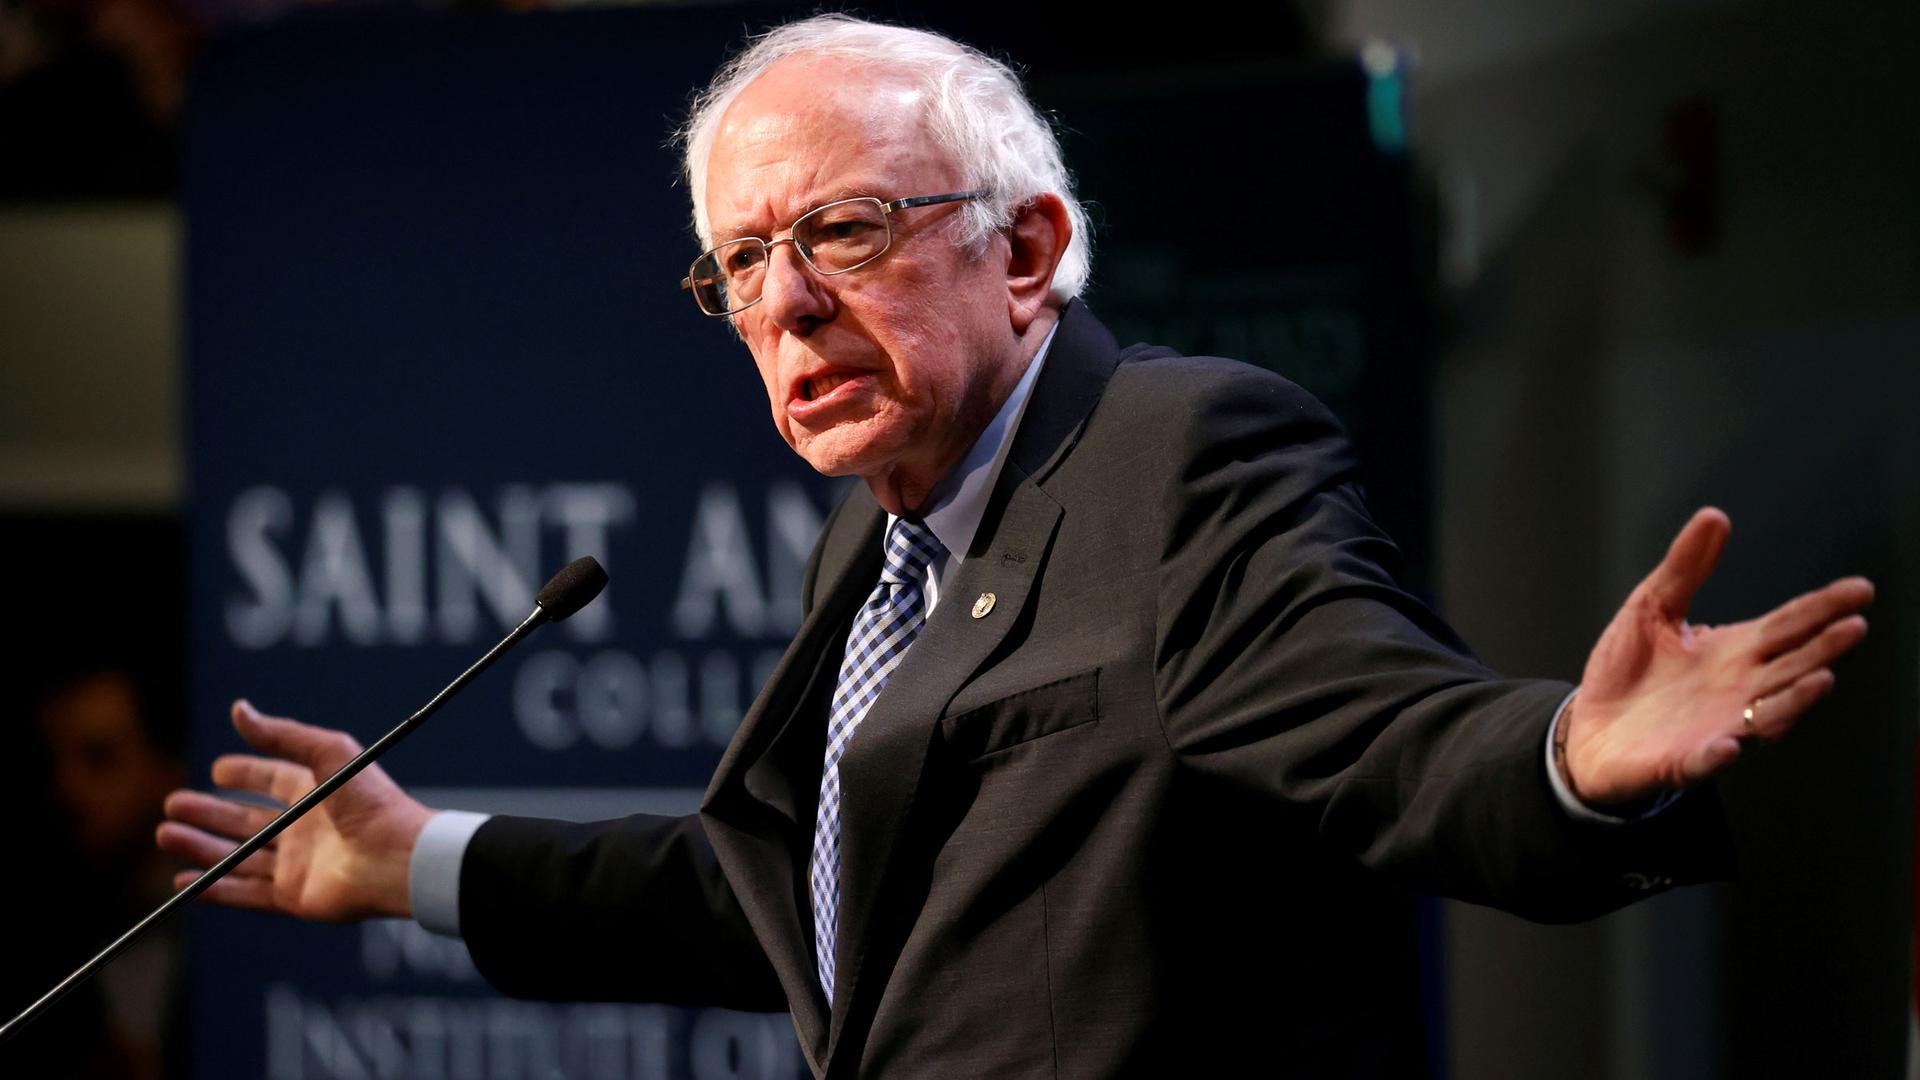 Dem. US presidential candidate Sen. Bernie Sanders speaks at the Politics and Eggs event at the New Hampshire Institute of Politics at Saint Anselm College in Manchester. 